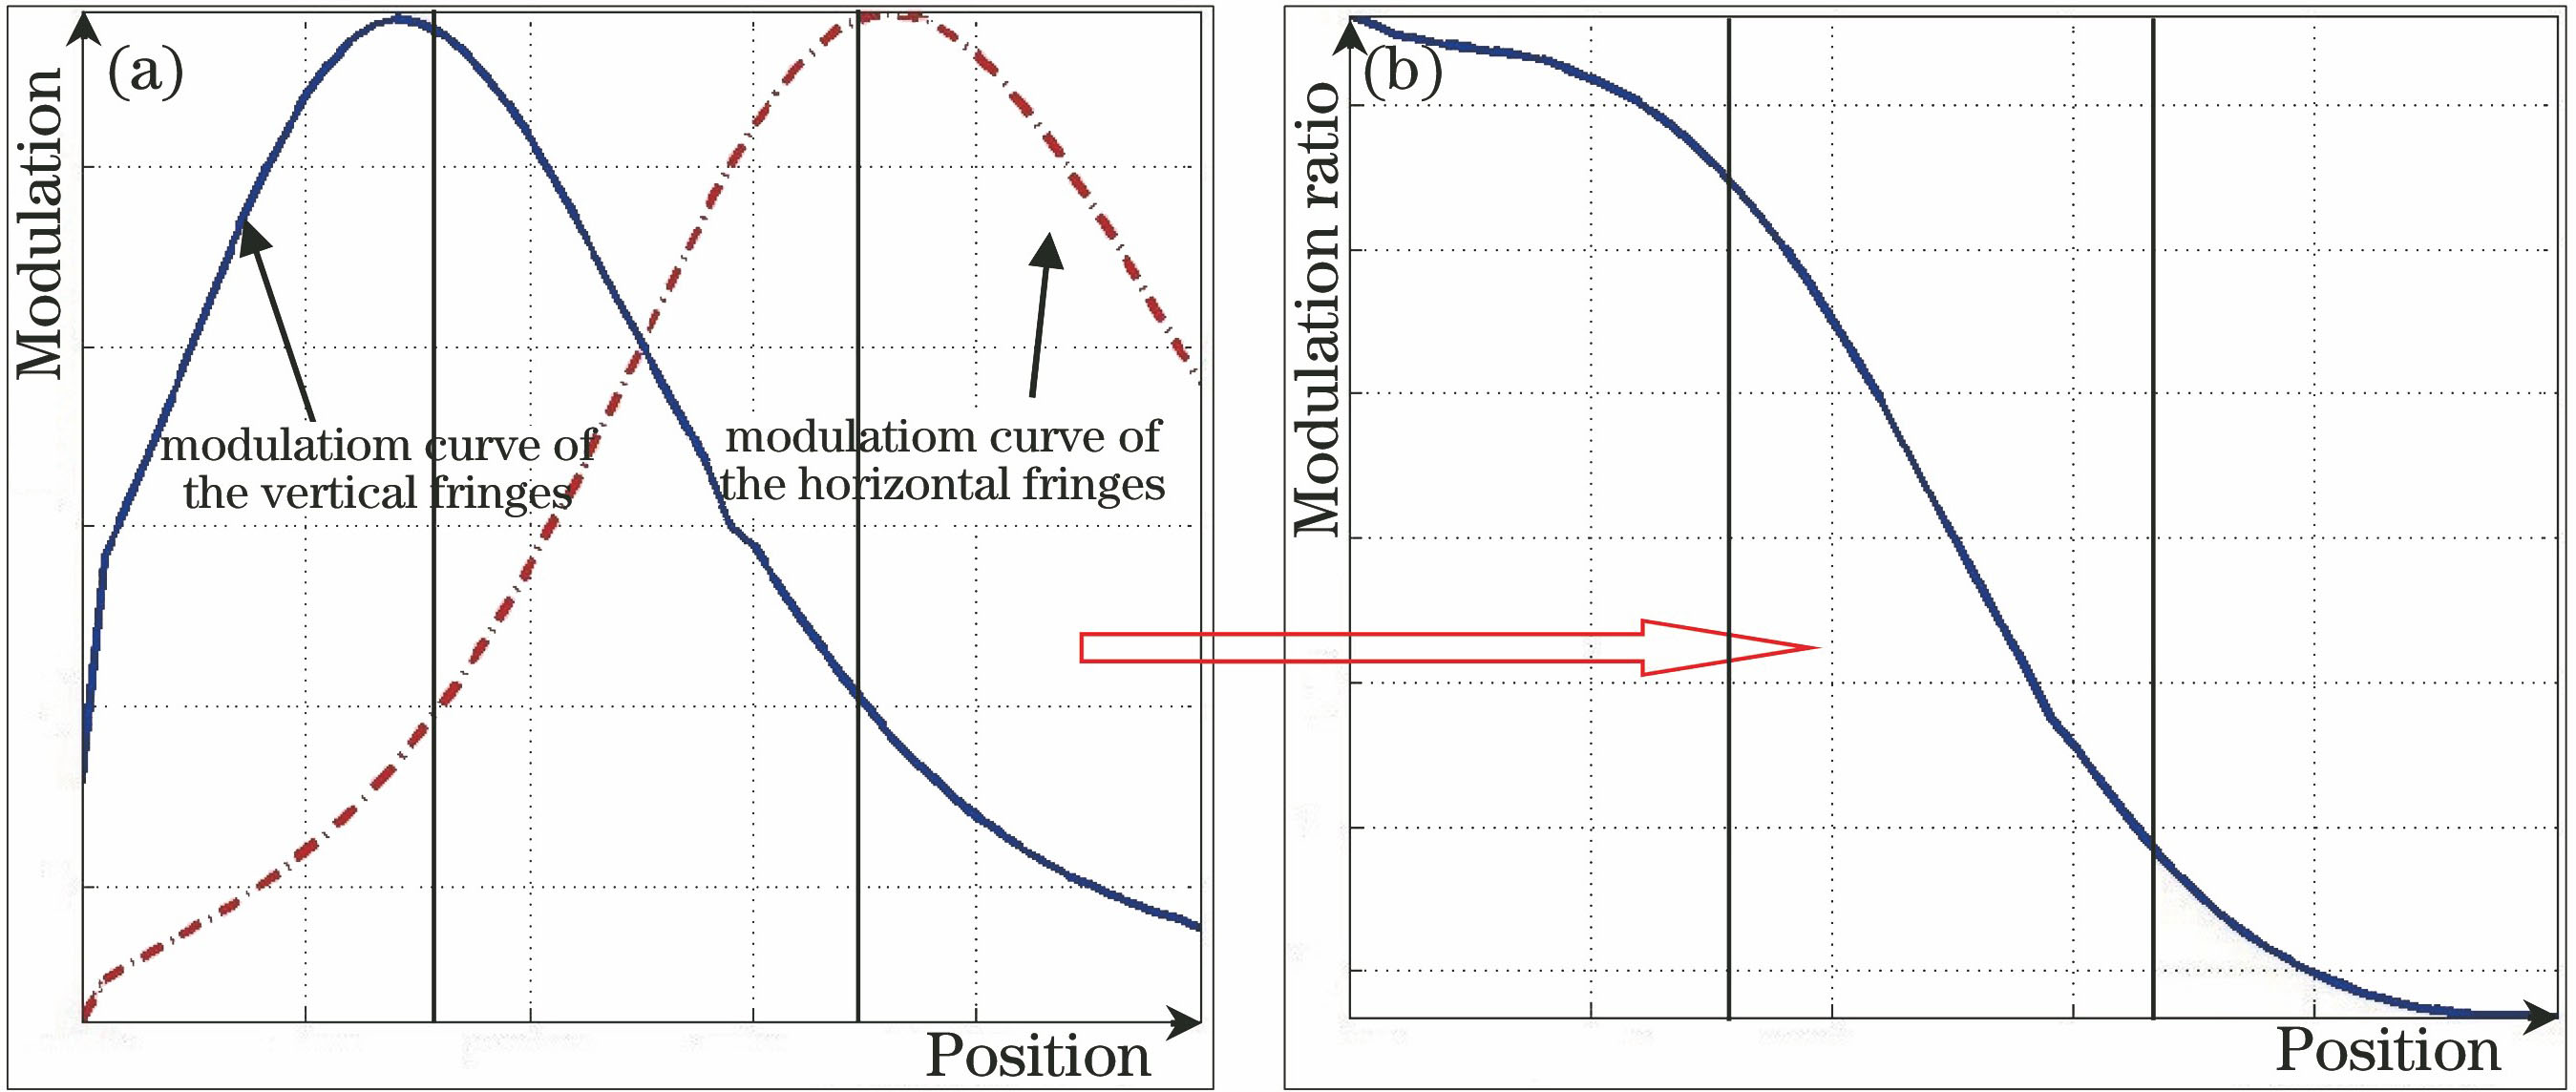 Principle of height mapping. (a) Modulation curves of two grating fringes; (b) distribution of parameter MR